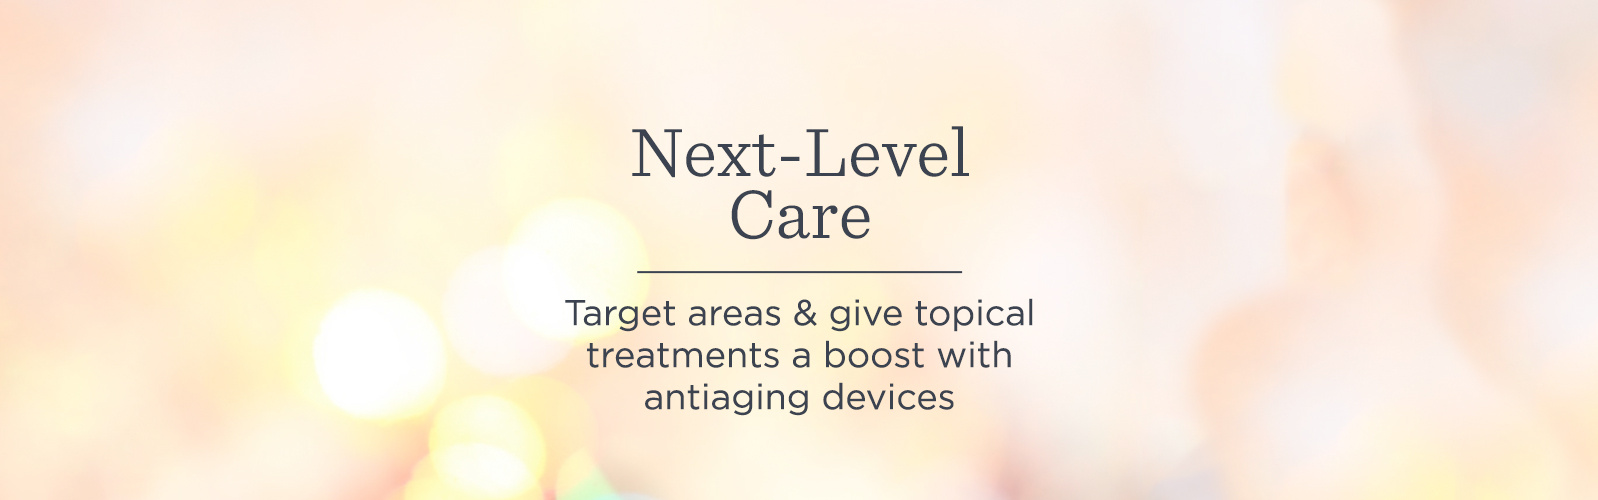 Next-Level Care. Target areas & give topical treatments a boost with antiaging devices